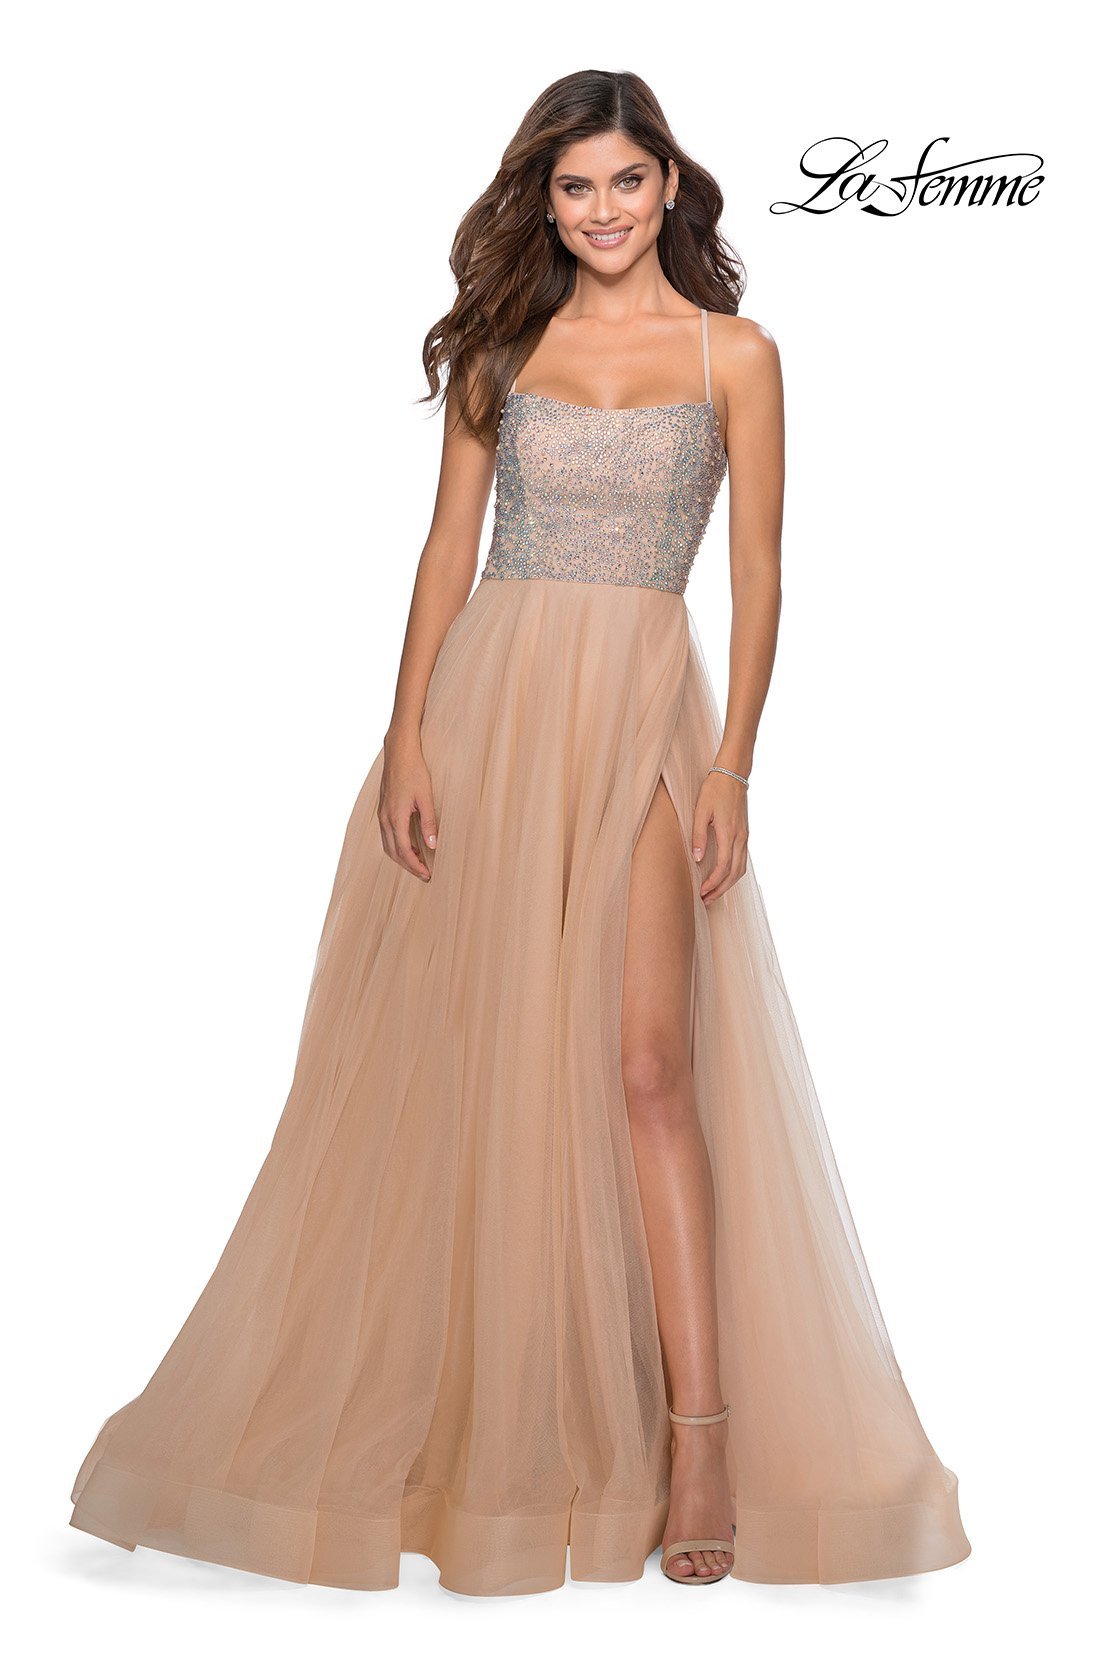 La Femme 28530 dress images in these colors: Mauve, Nude, Pale Yellow, Silver.